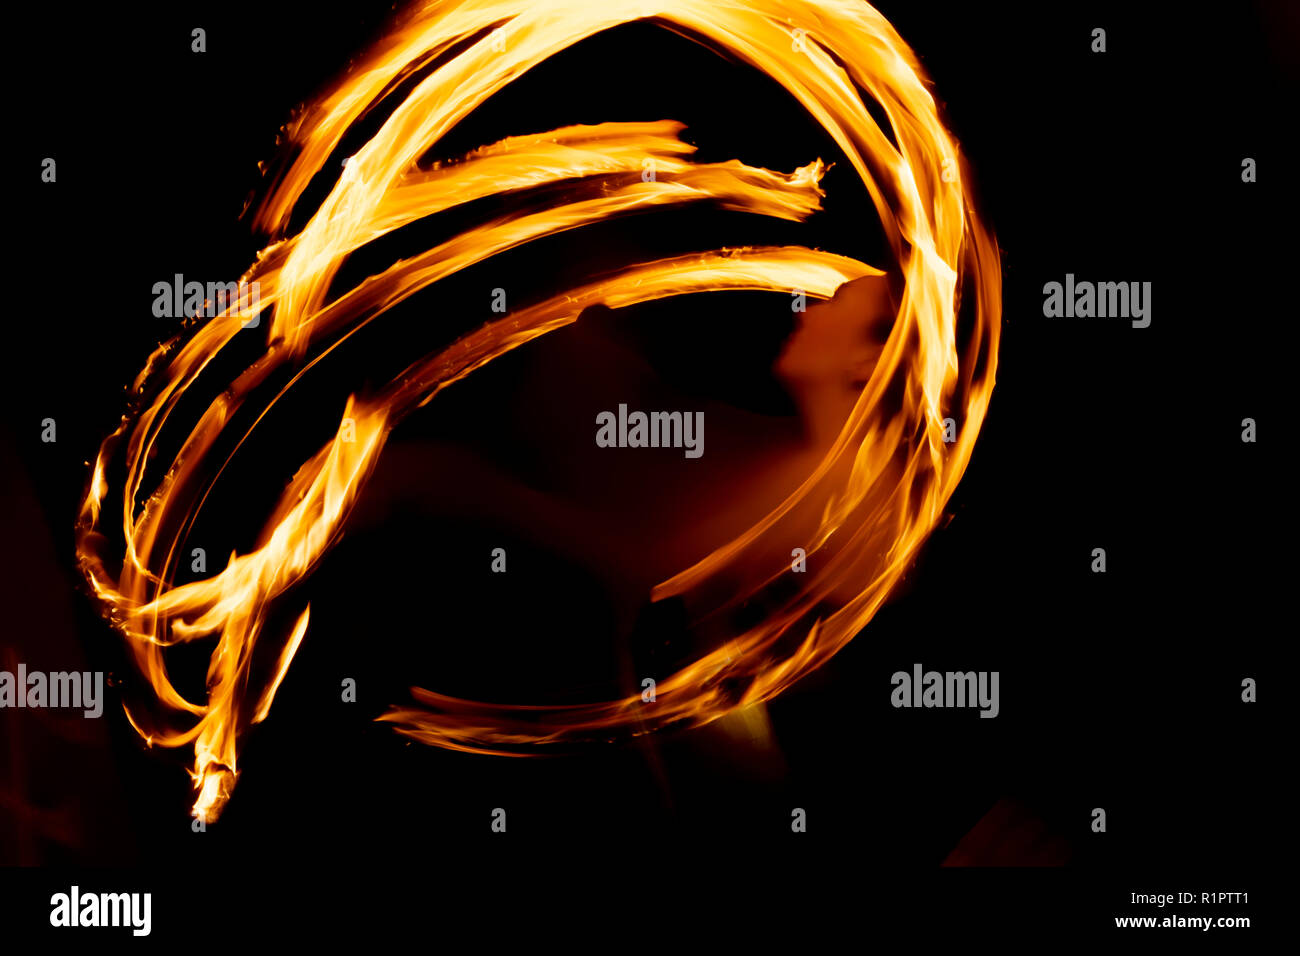 Fire poi slow shutter flame trails Stock Photo